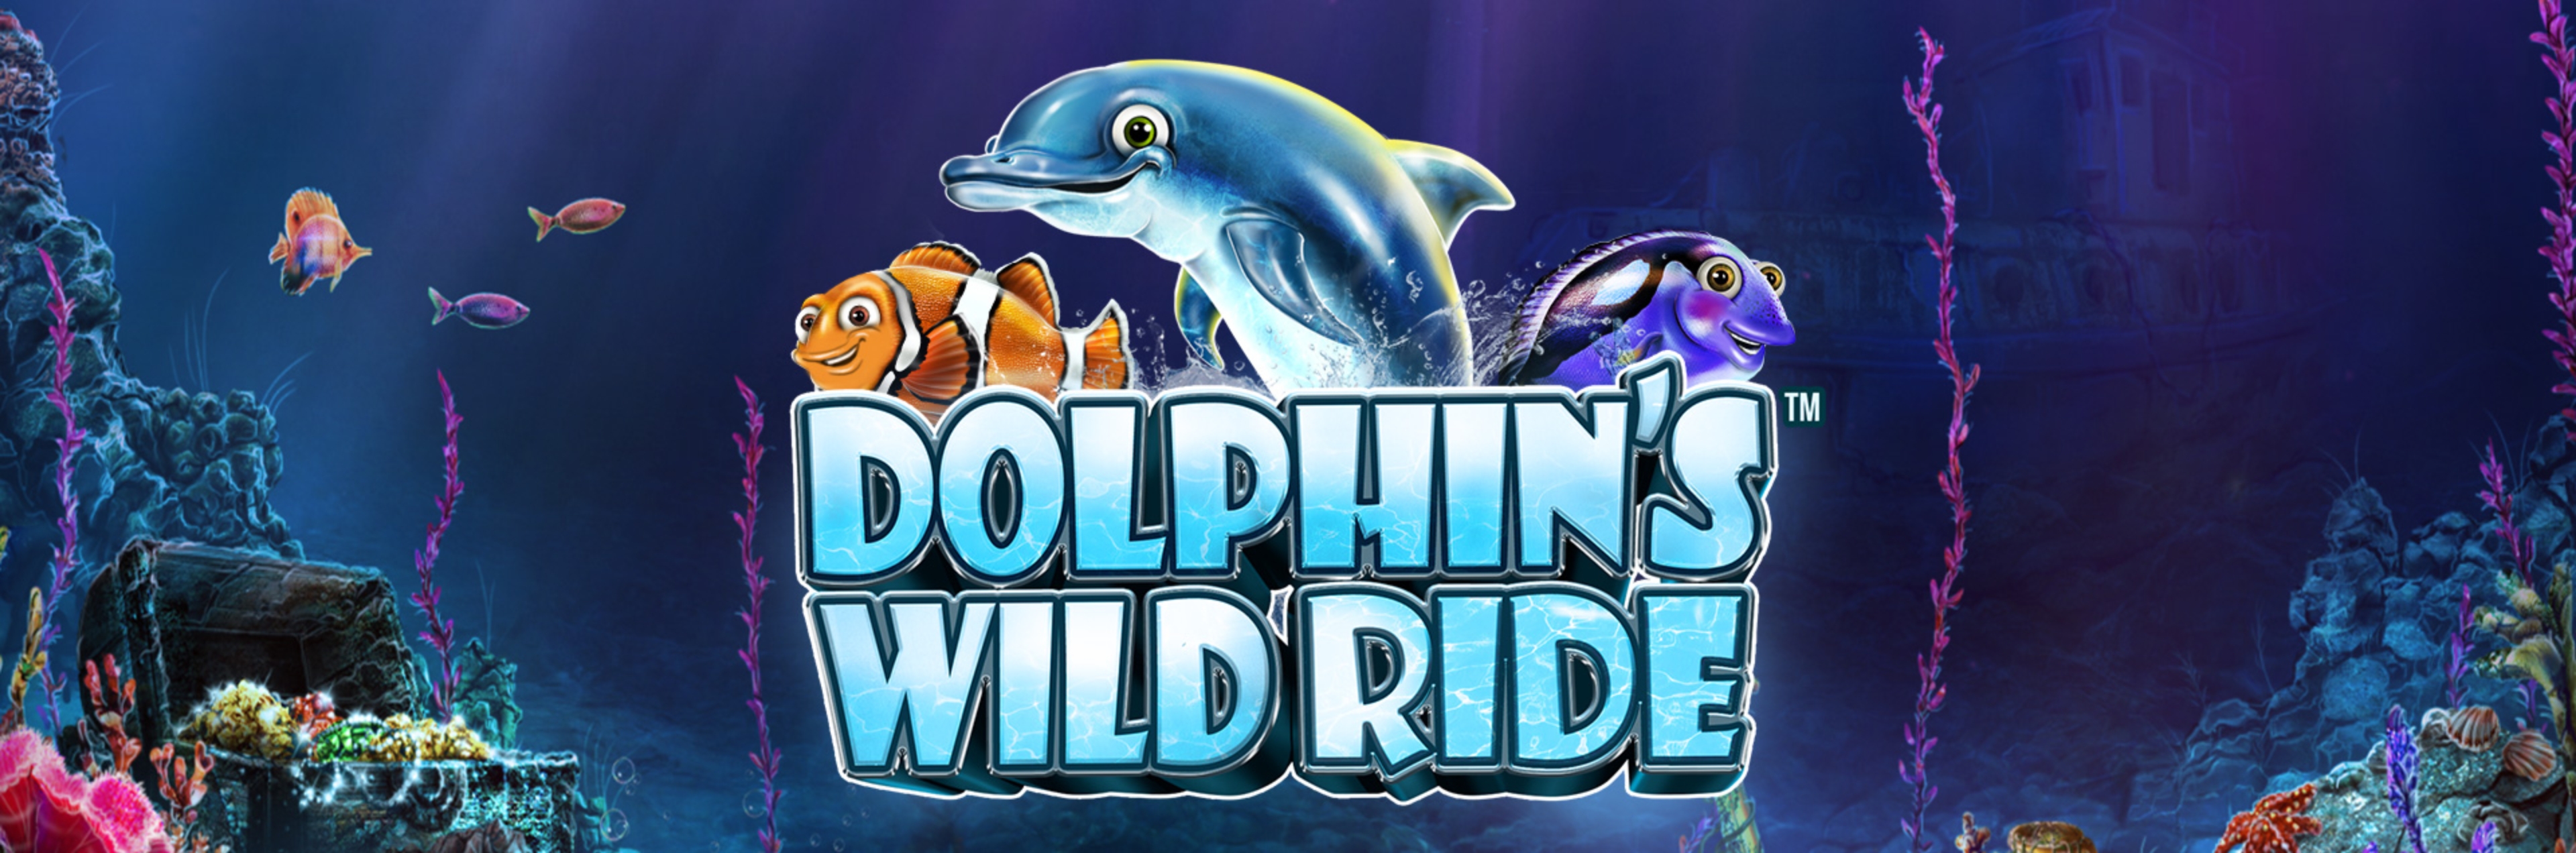 The Dolphin's Wild Ride Online Slot Demo Game by Synot Games